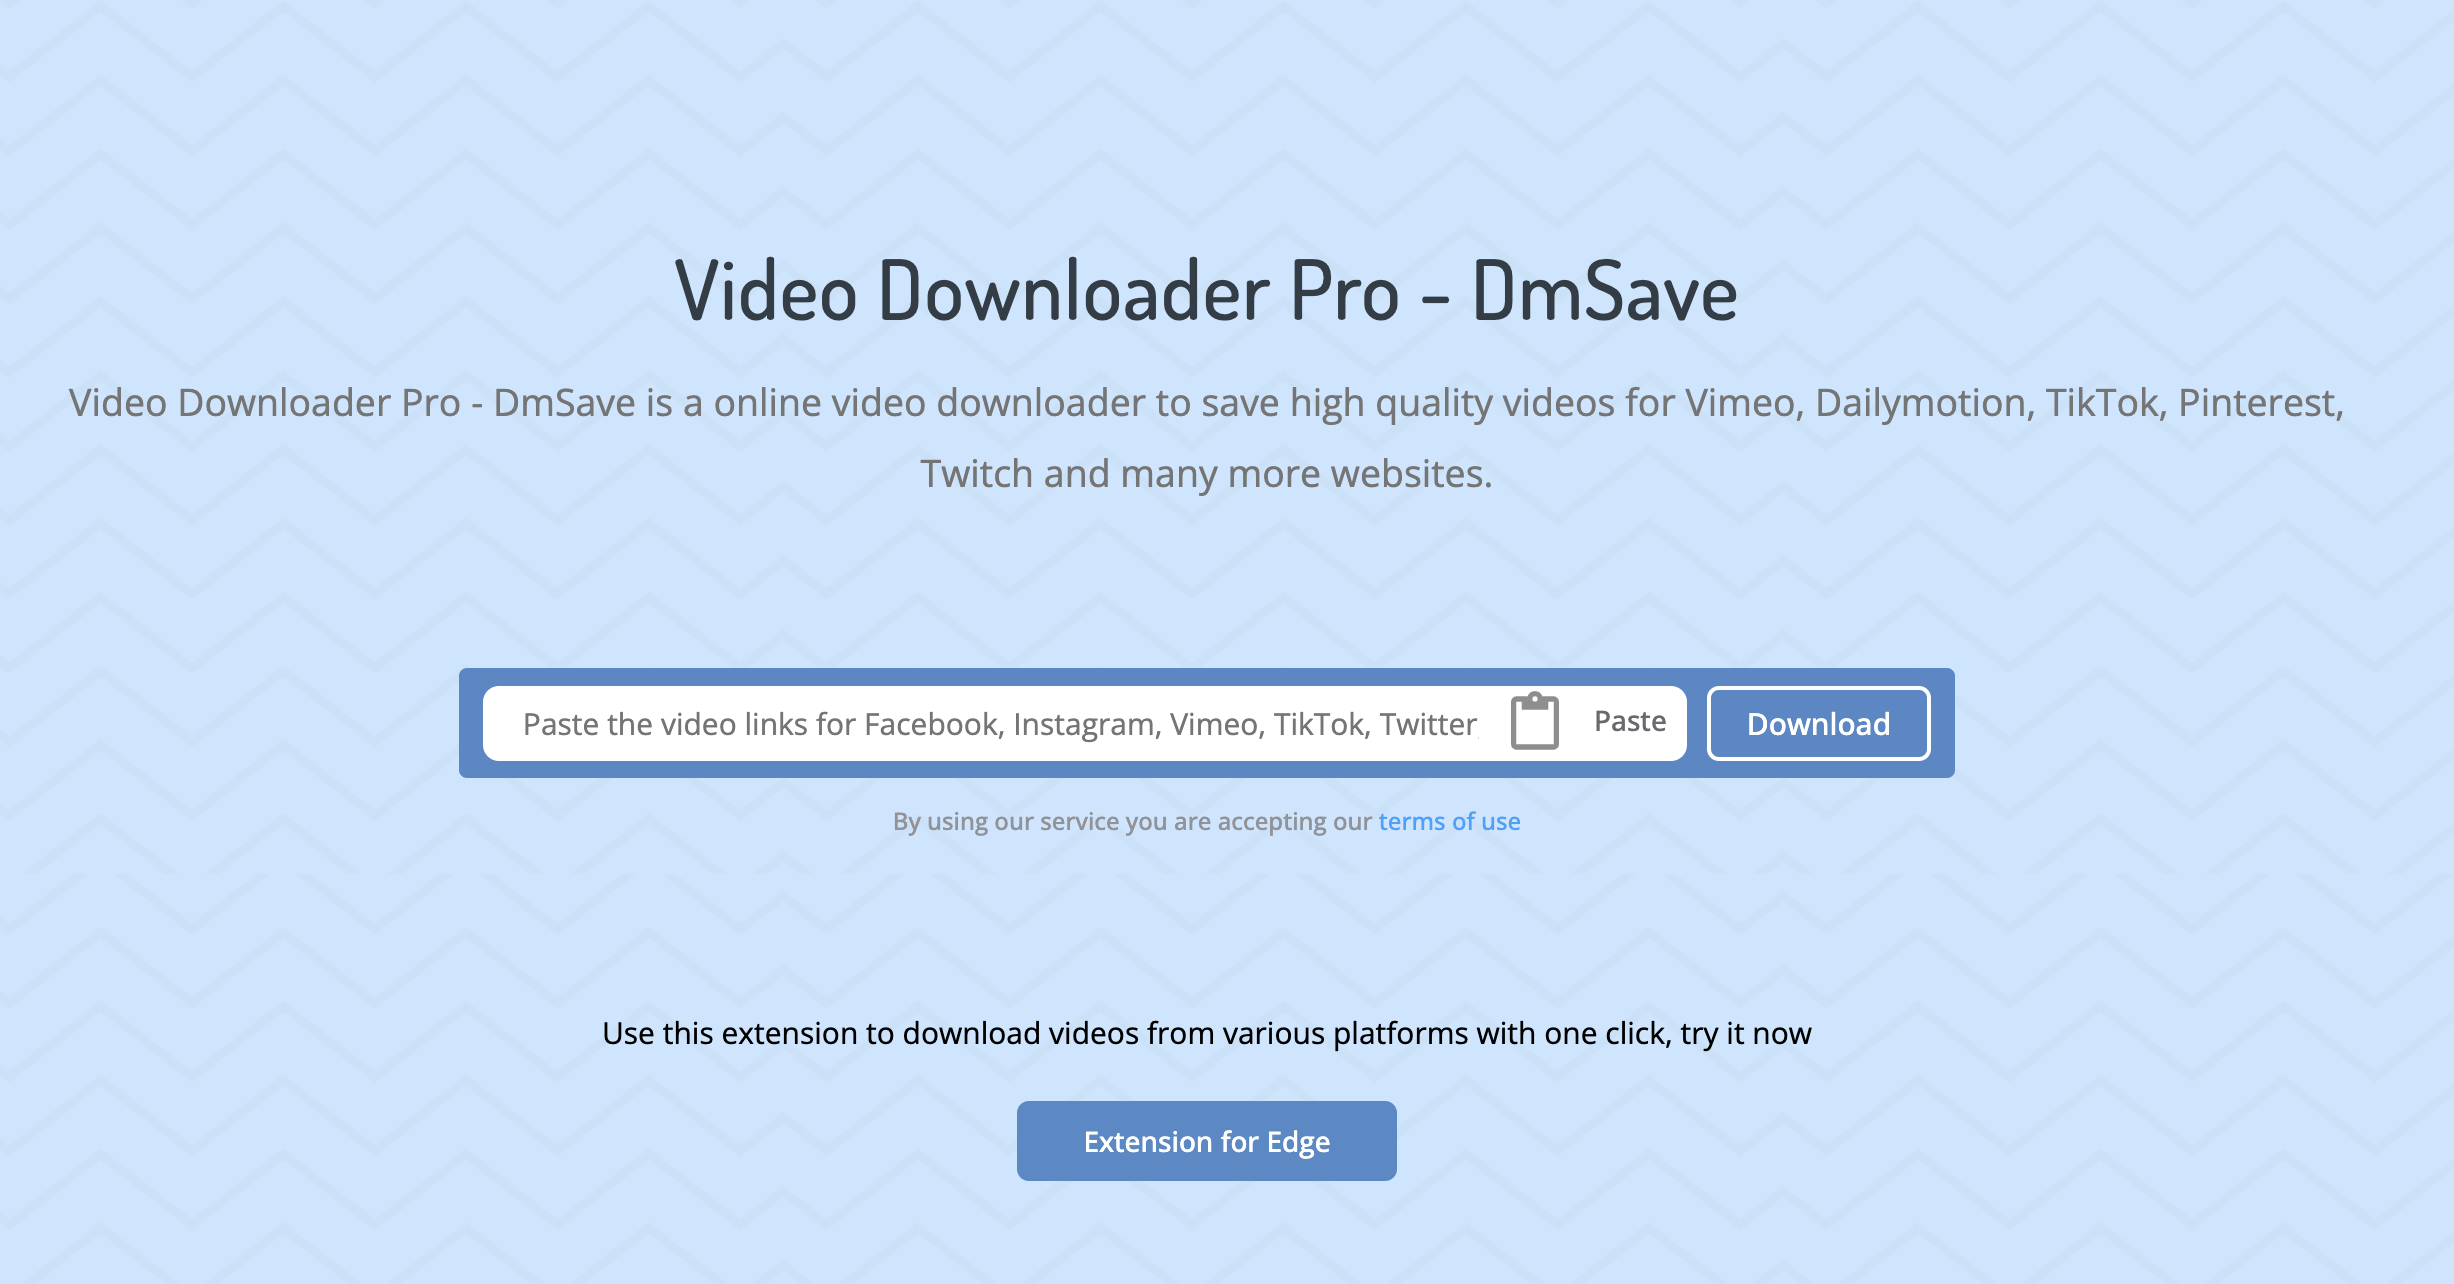 What is DmSave?